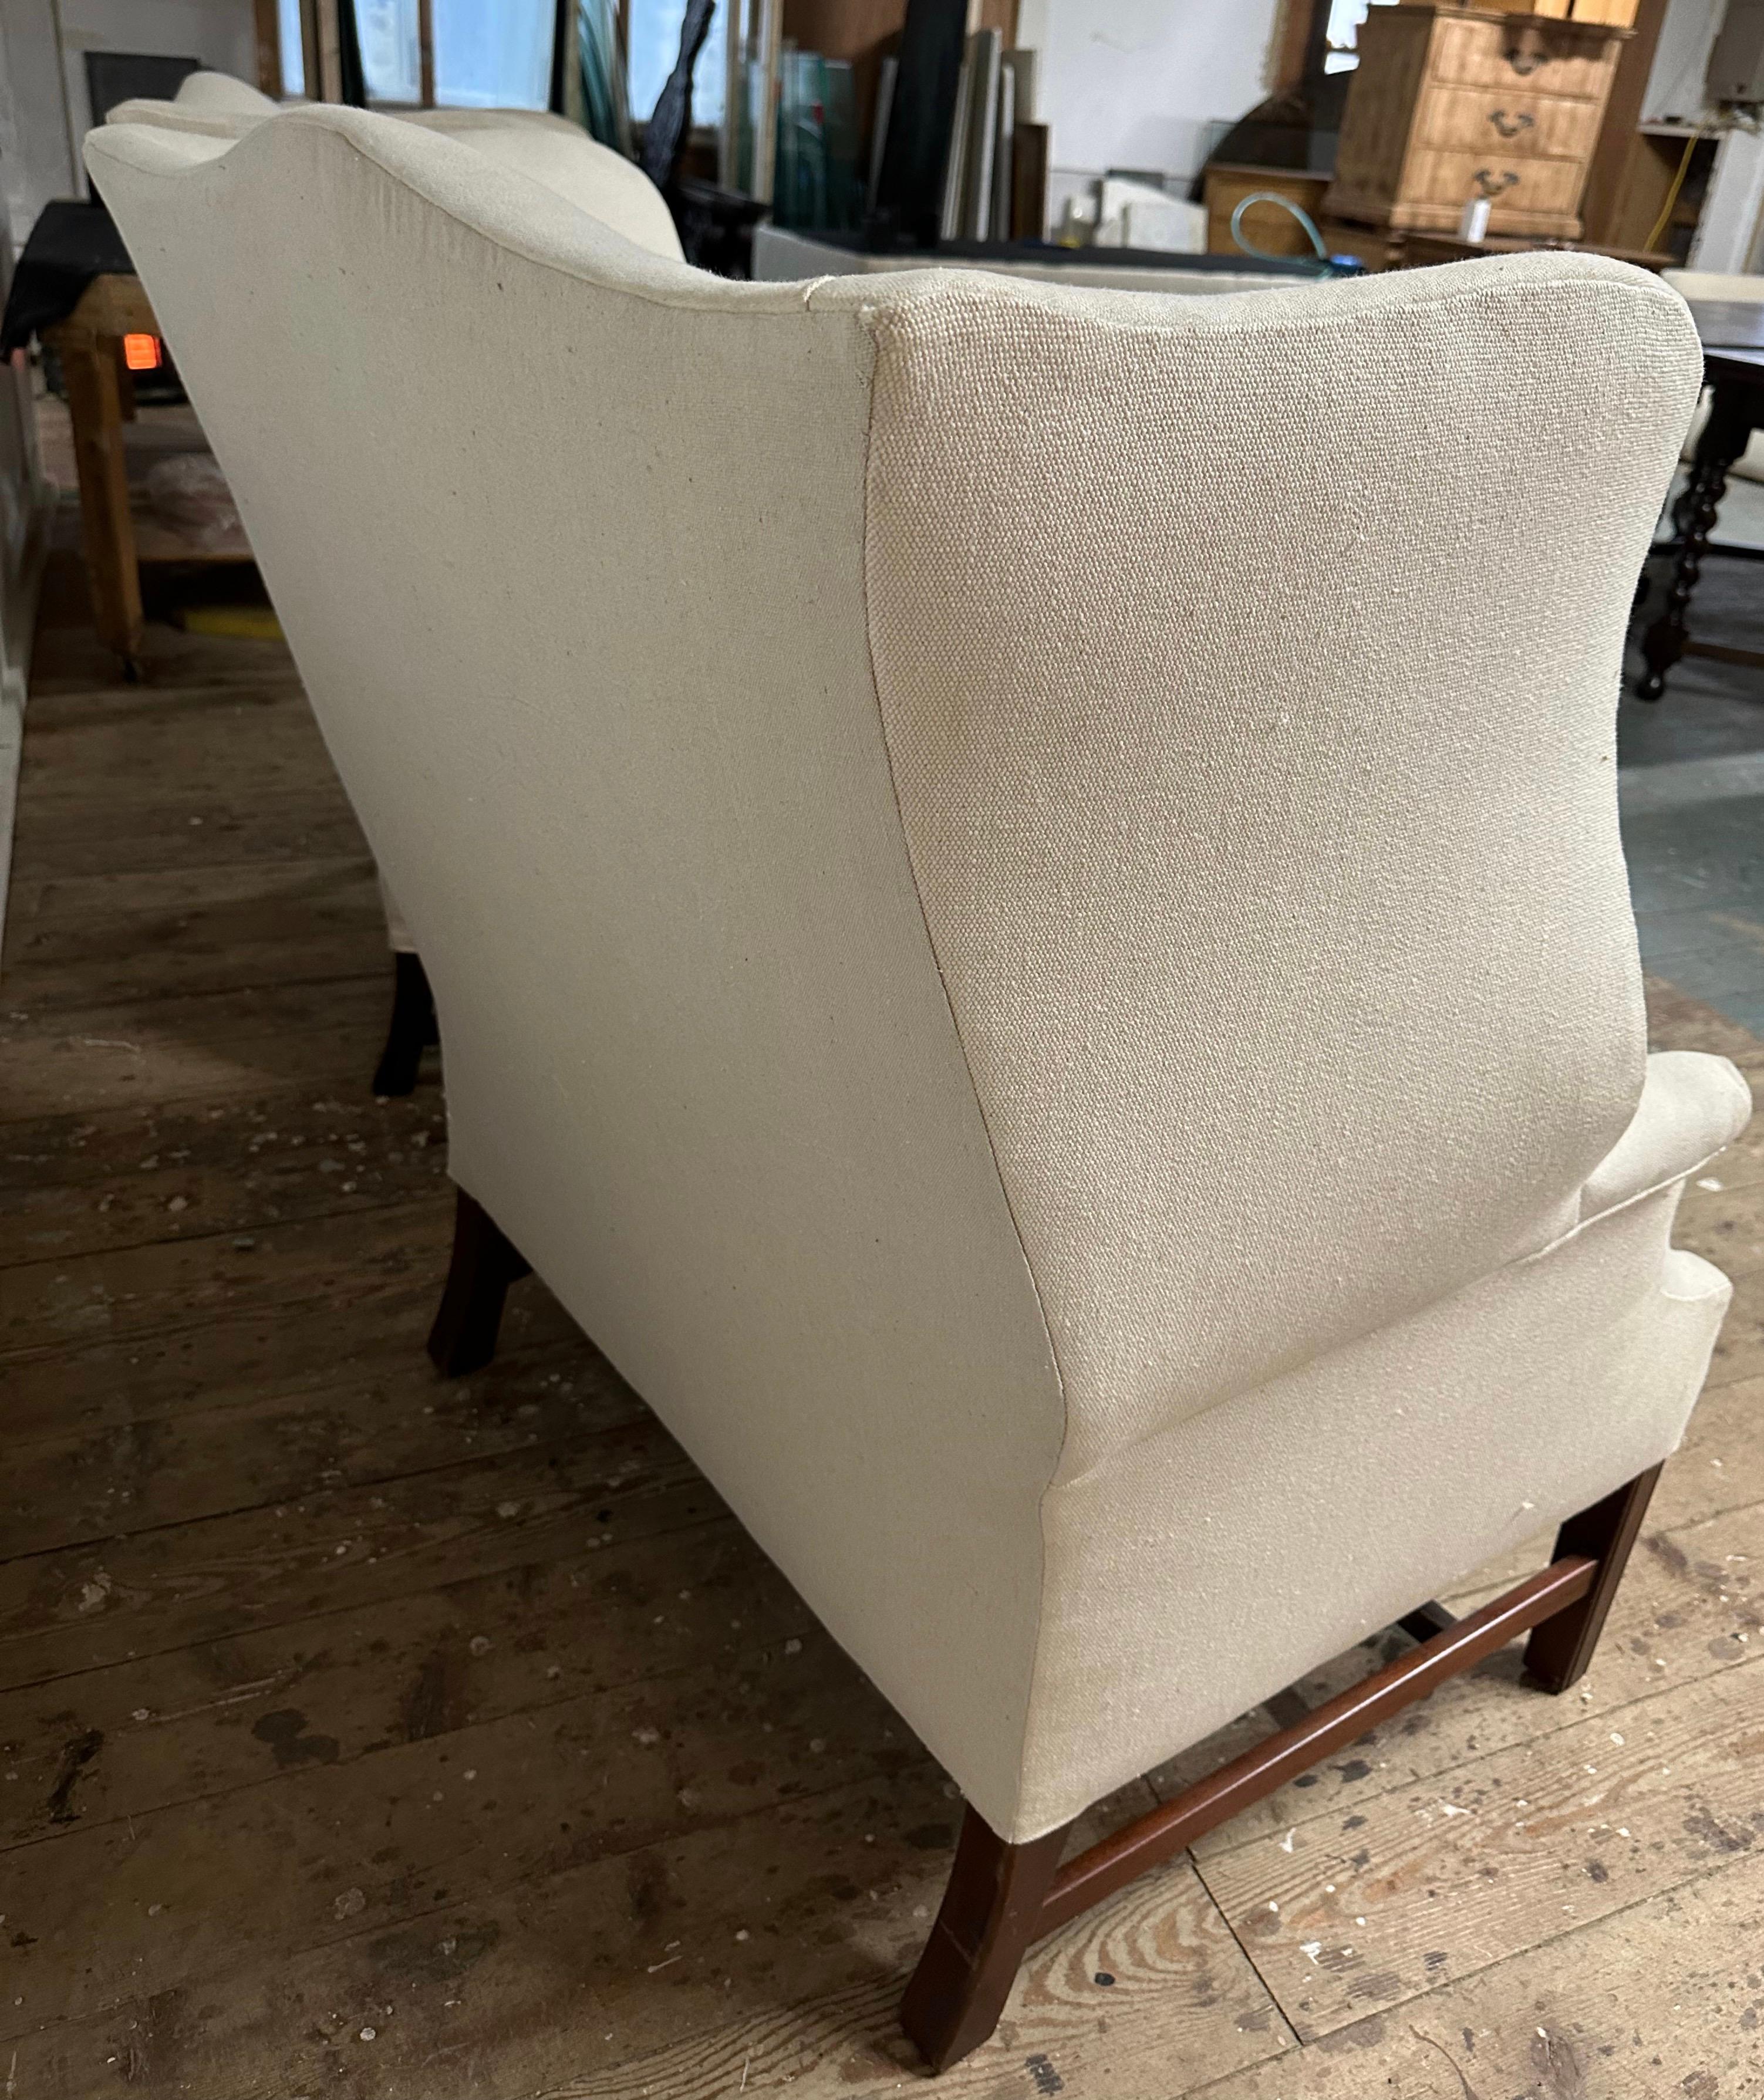 Pair of Georgian Style Wing Chairs In Good Condition For Sale In Sheffield, MA